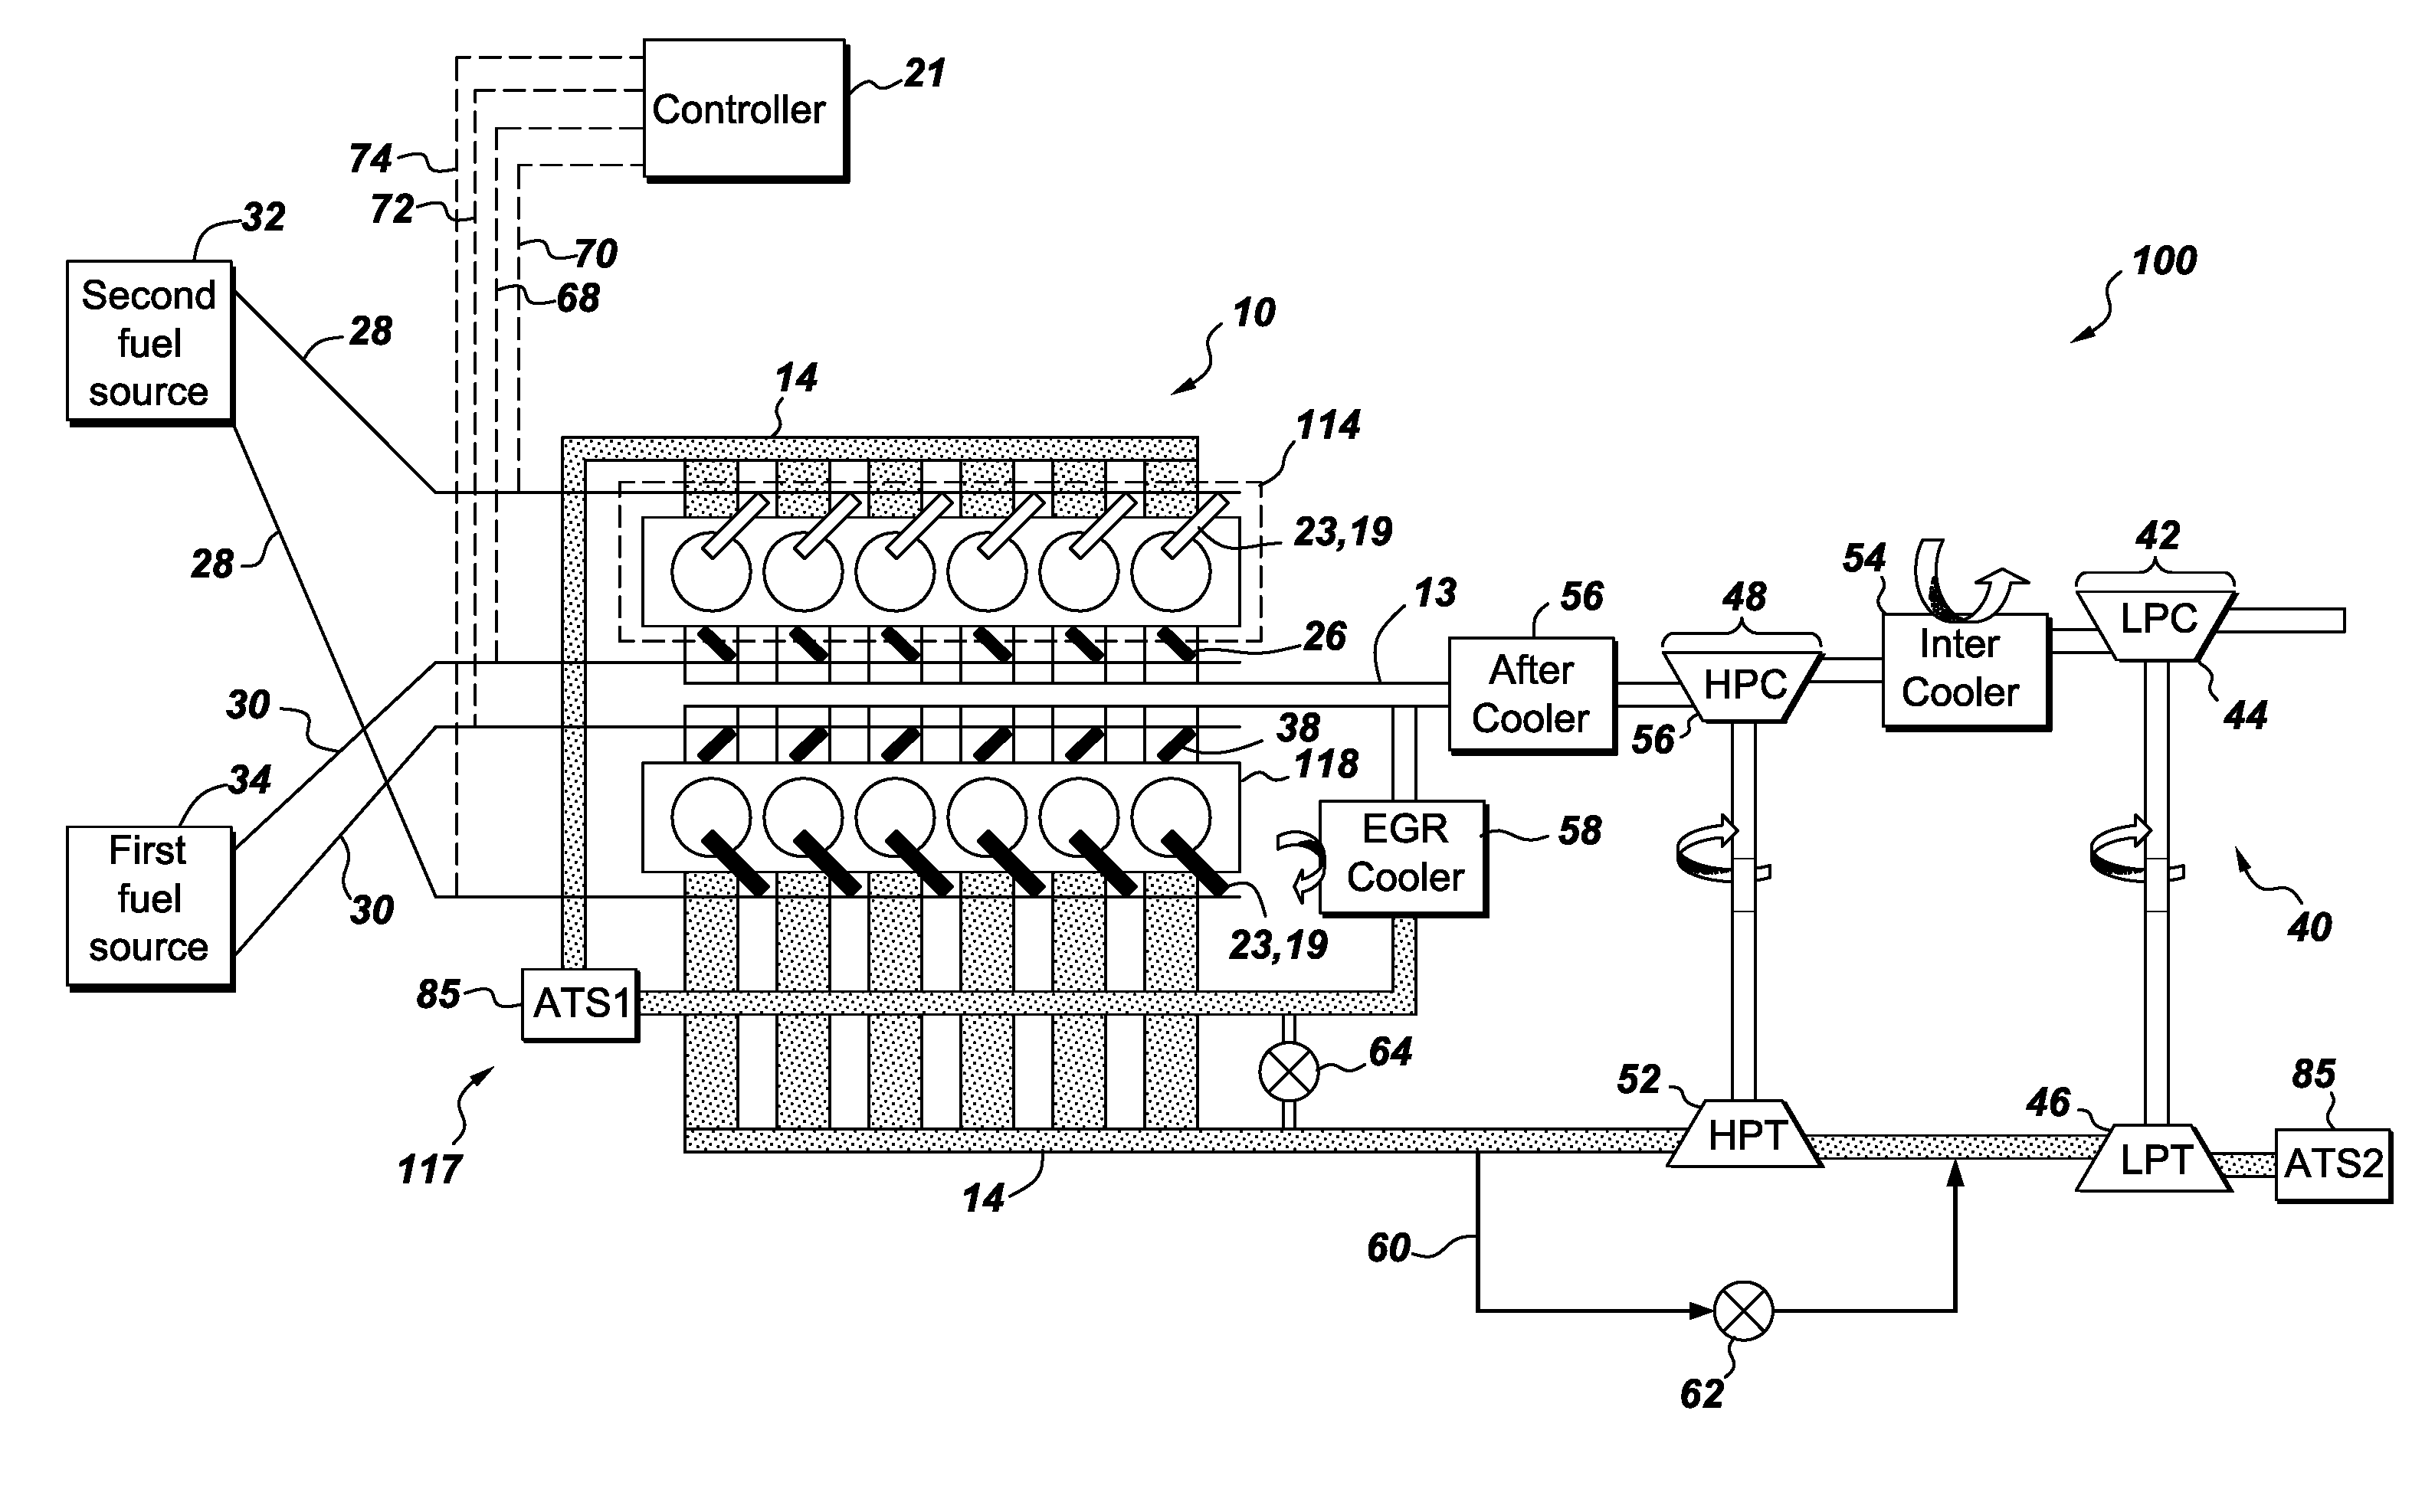 Method for operating an engine